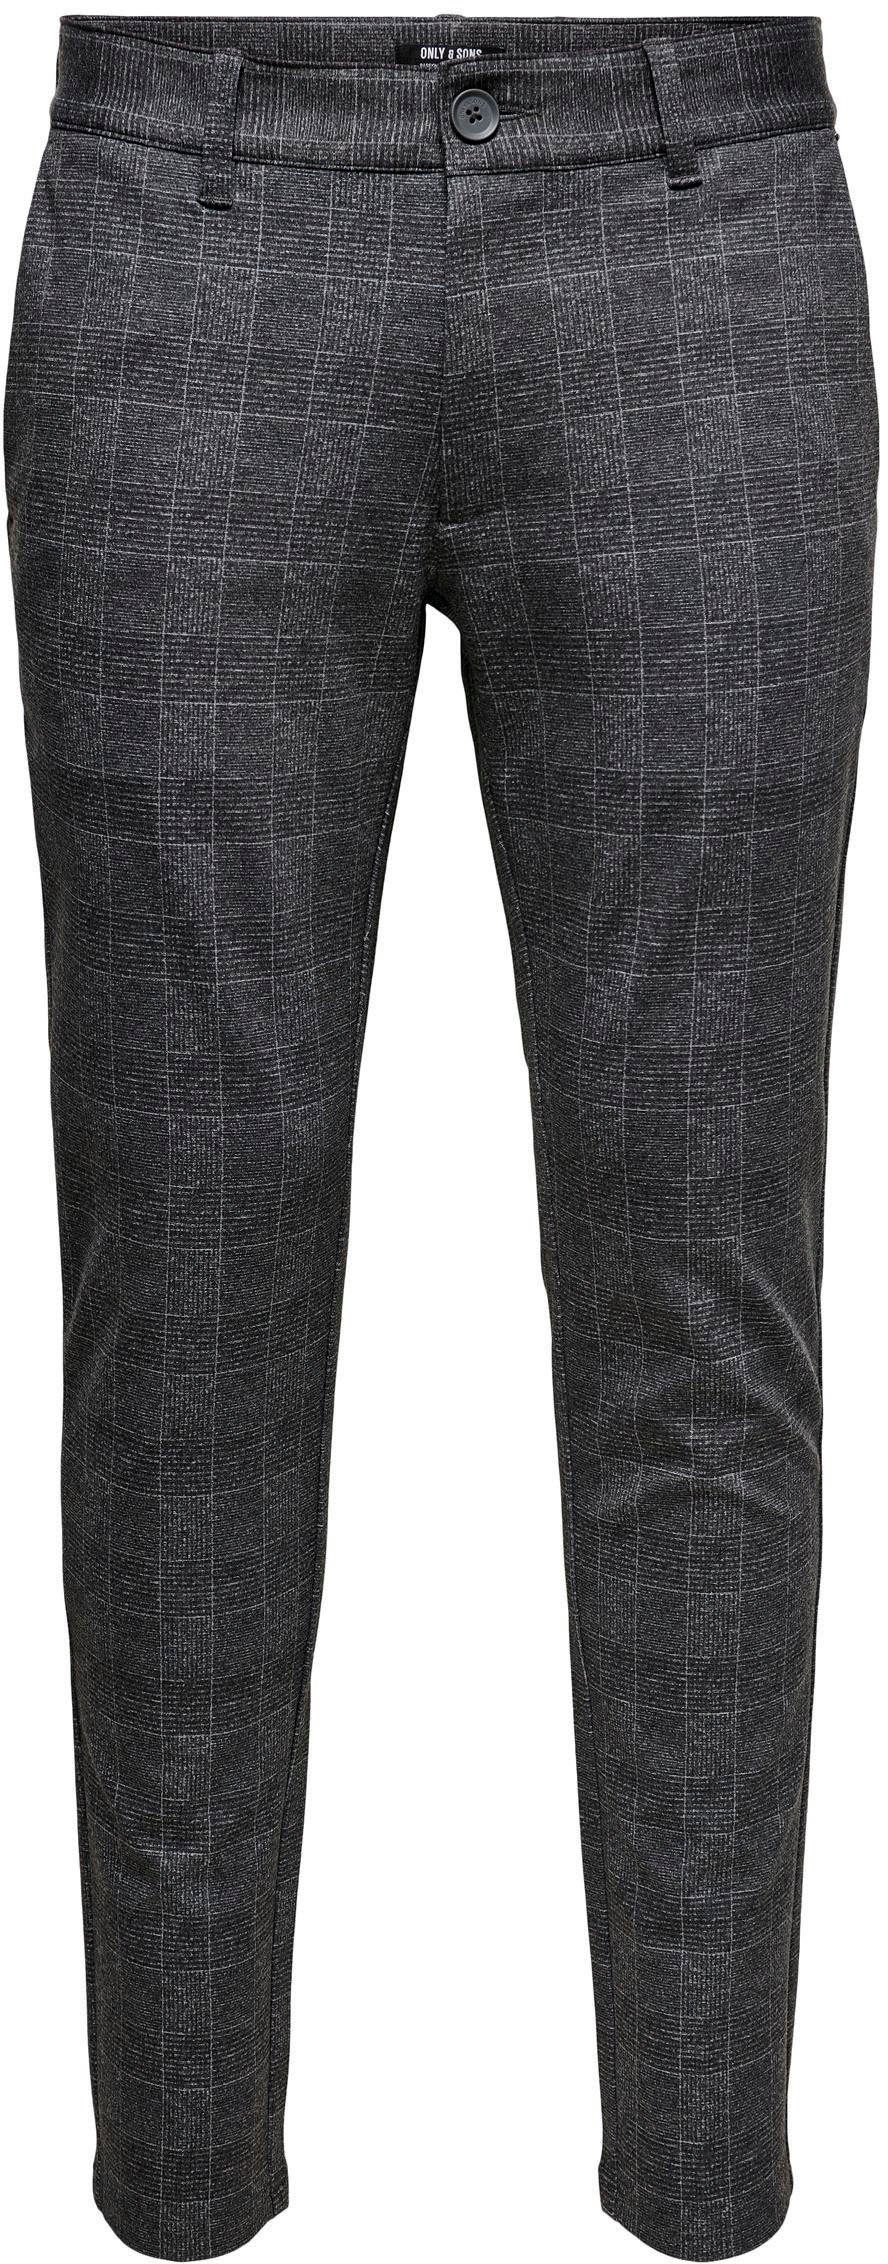 PANTS MARK Chinohose SONS CHECK & ONLY schwarz-kariert